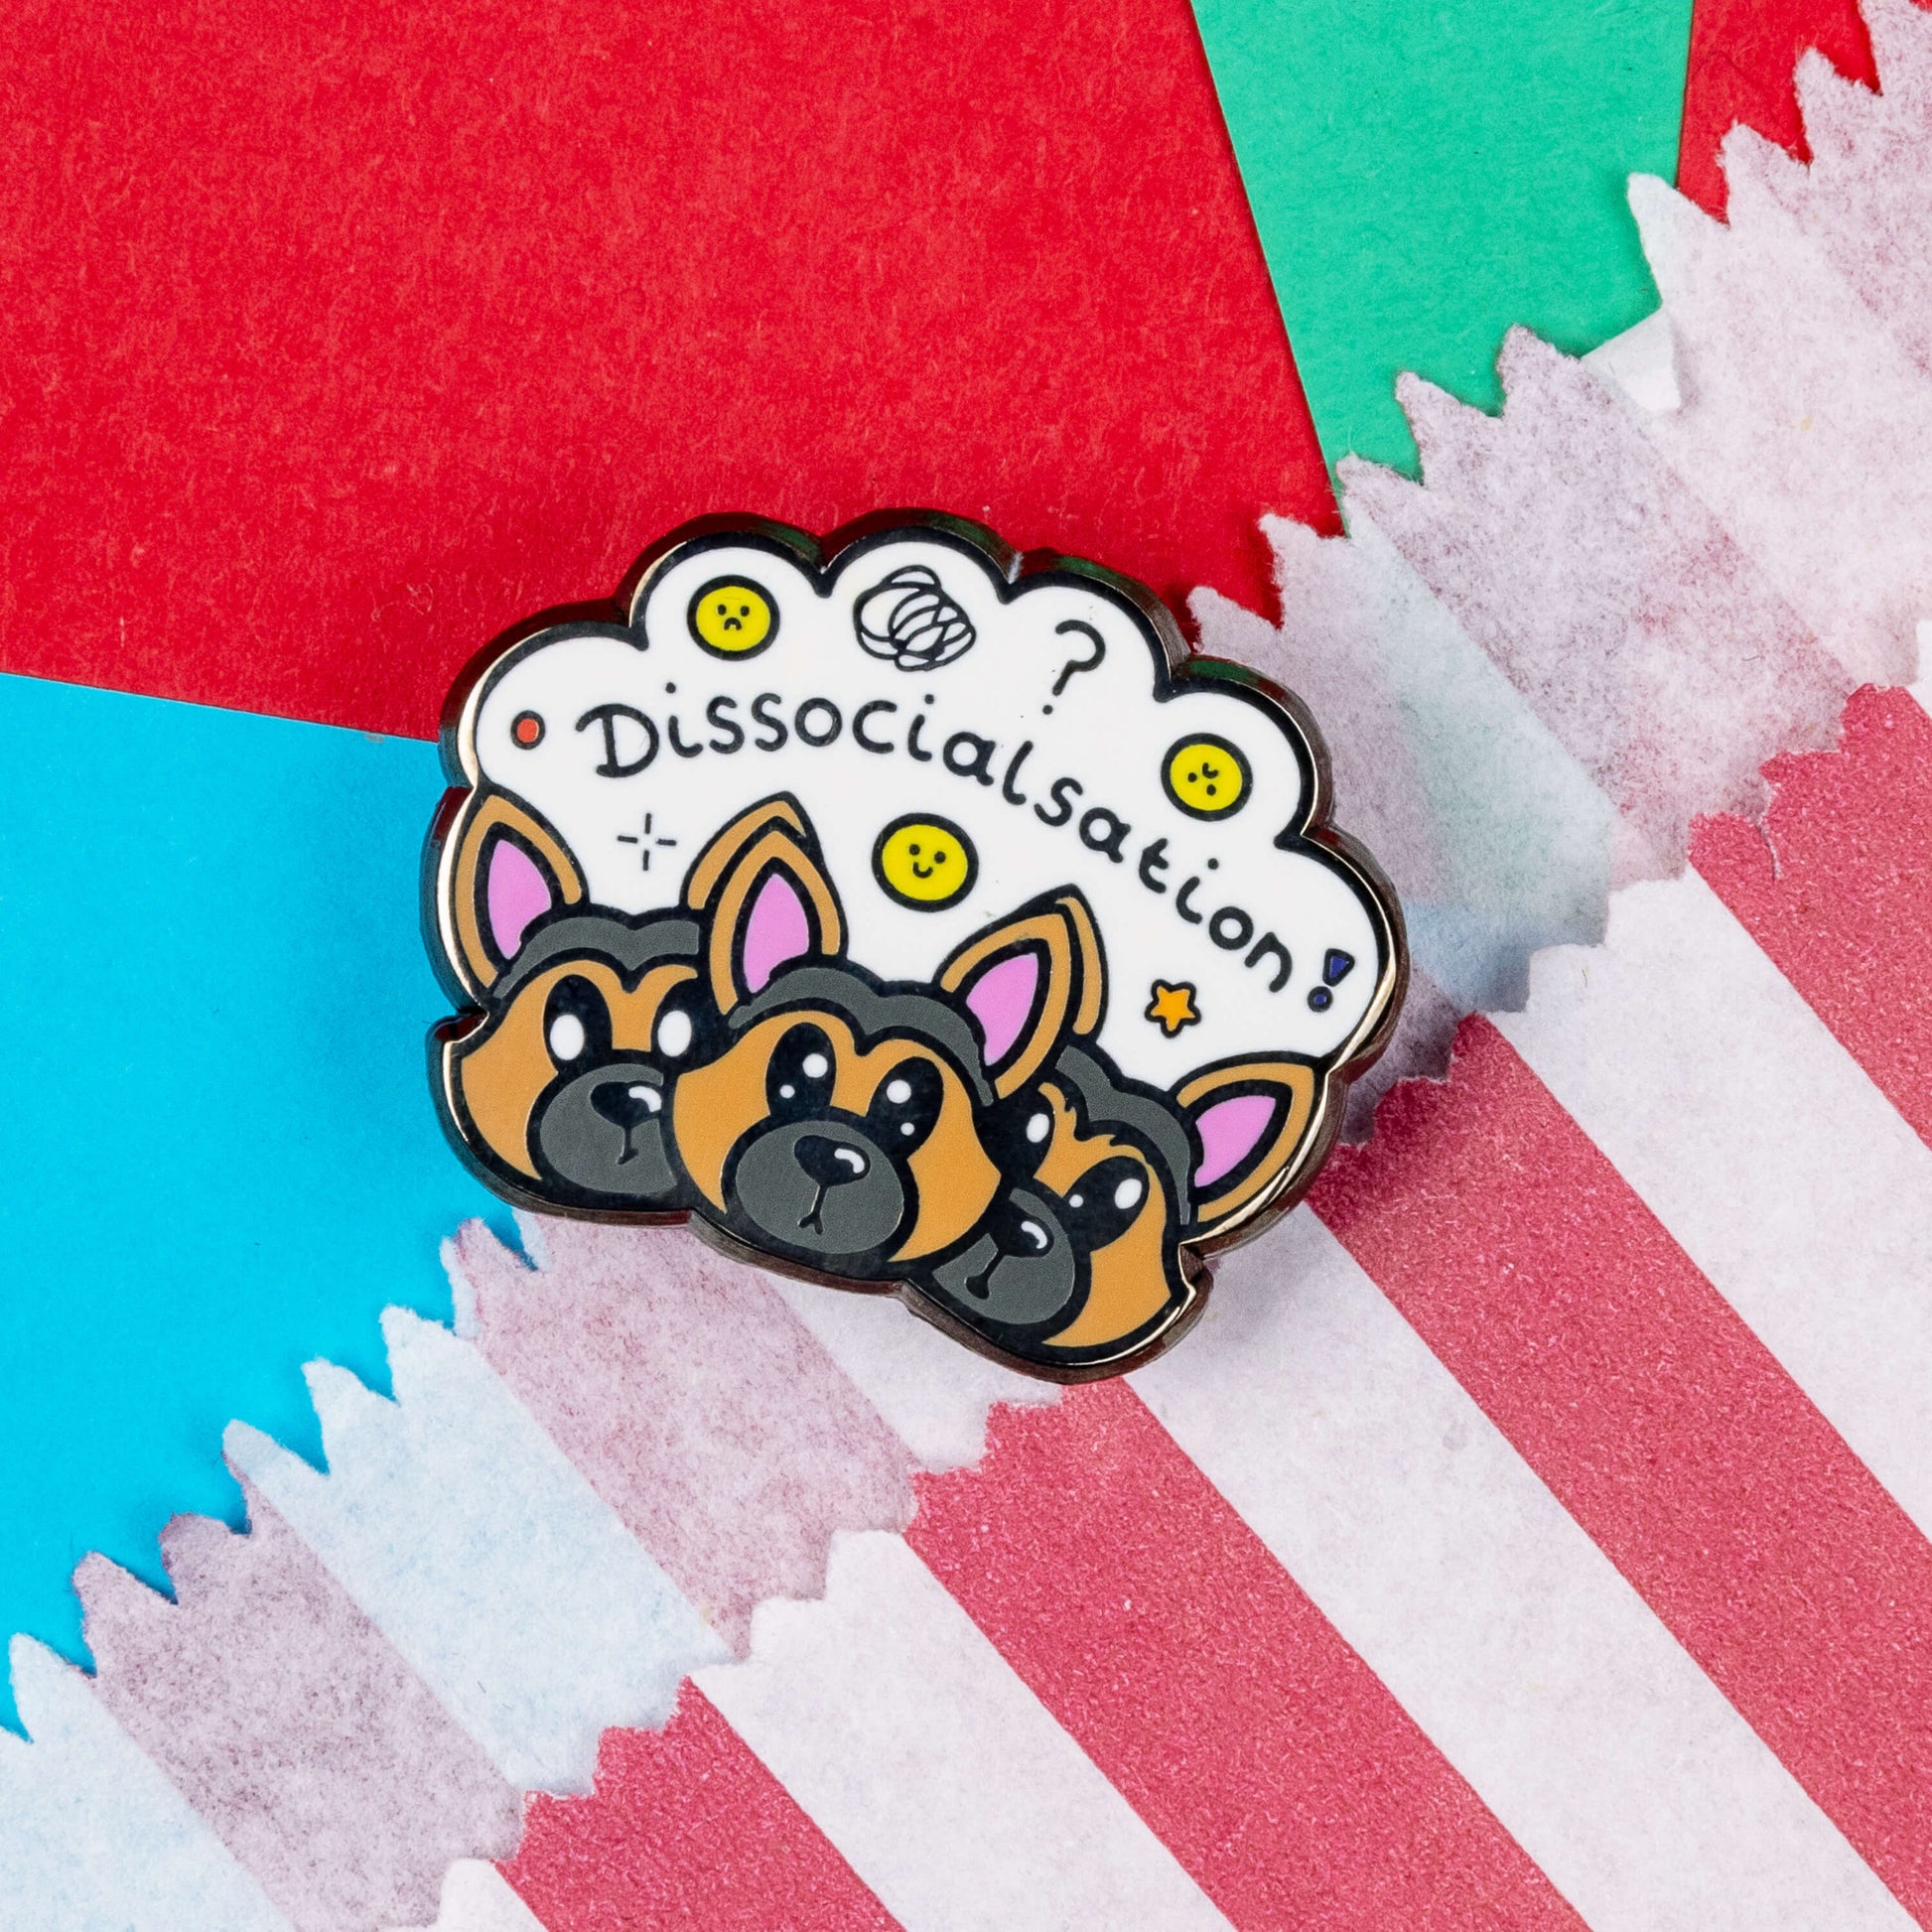 The Dissocialsation Enamel Pin - Dissociation on a red, teal and blue background next to a red and white striped paper bag. Three confused brown and black Alsatian dog heads with their ears perked up, above them is a white cloud with sad and happy yellow faces, sparkles, question marks and black text reading 'dissocialsation!'. The design is raising awareness for dissociation.